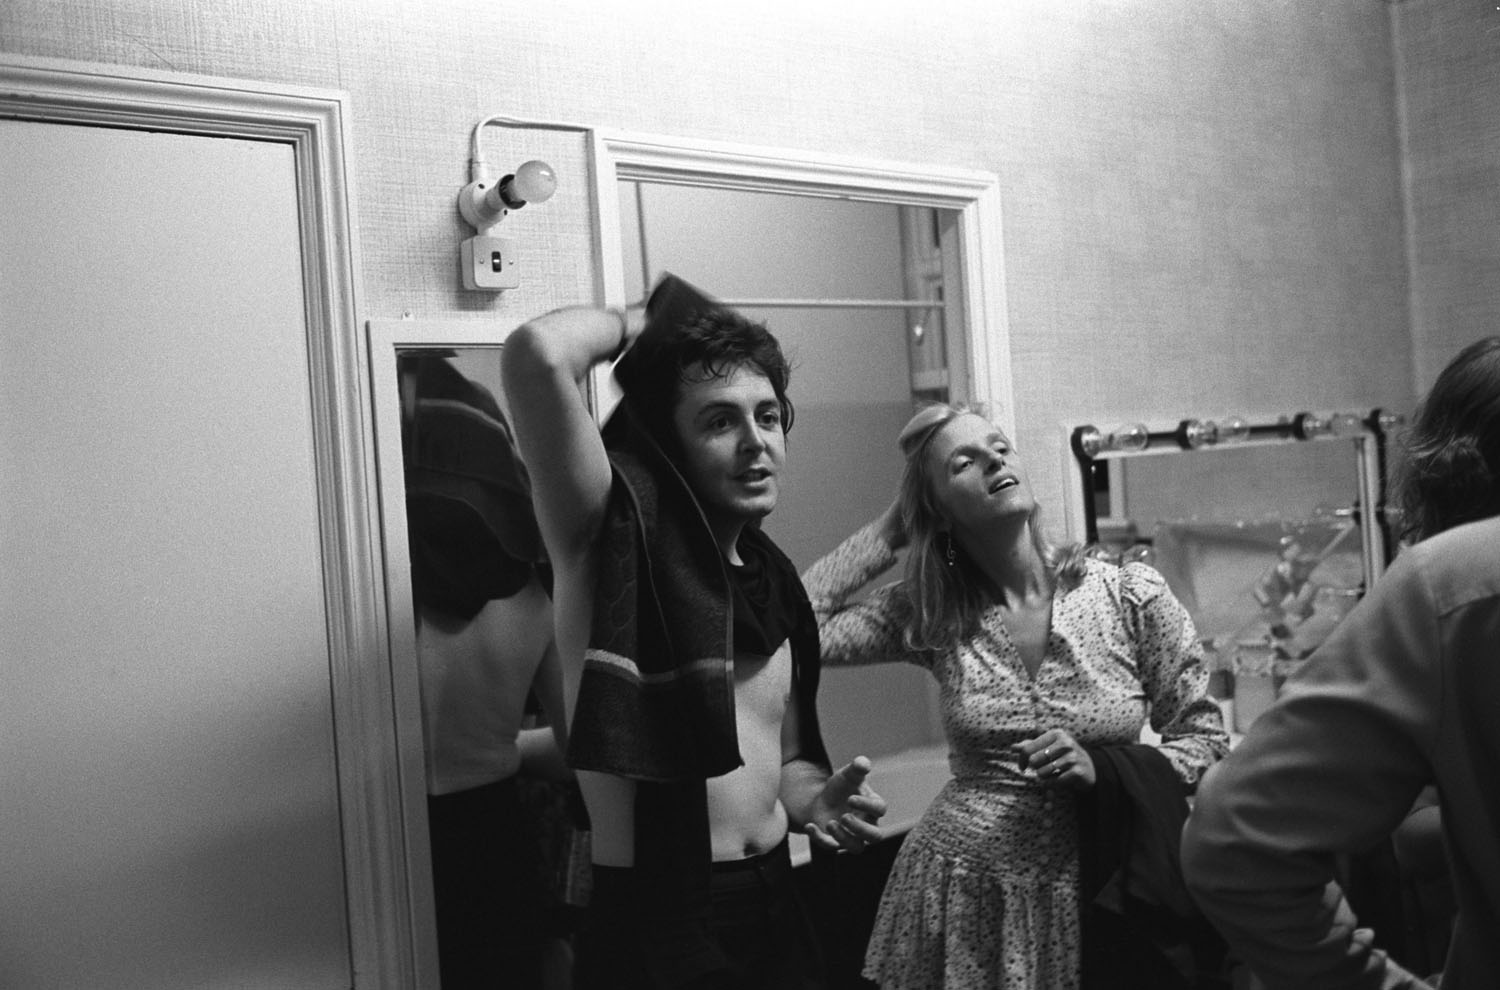 Paul and Linda McCartney in their dressing room after their performance in Bristol, England, during their band Wings' tour 1975.